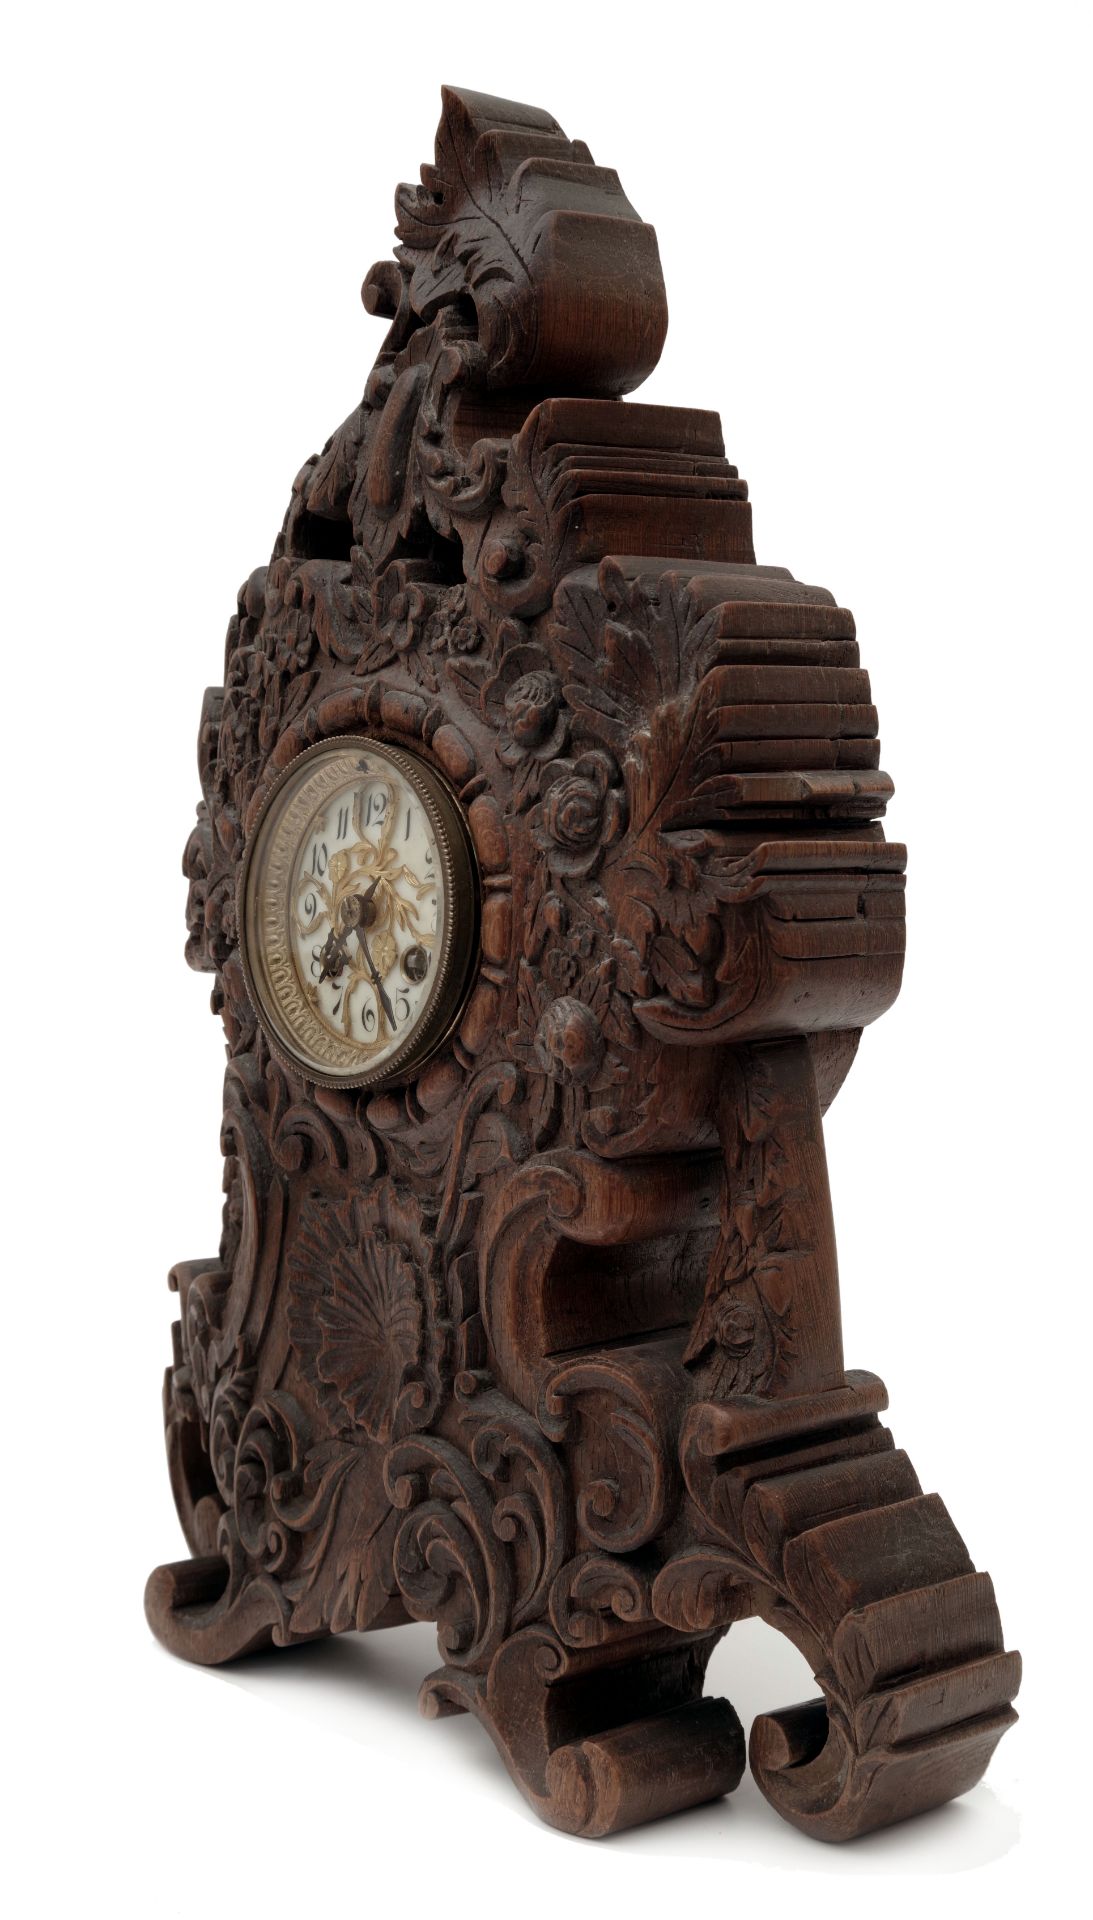 A French Rococo Style Mantel Clock - Image 2 of 2